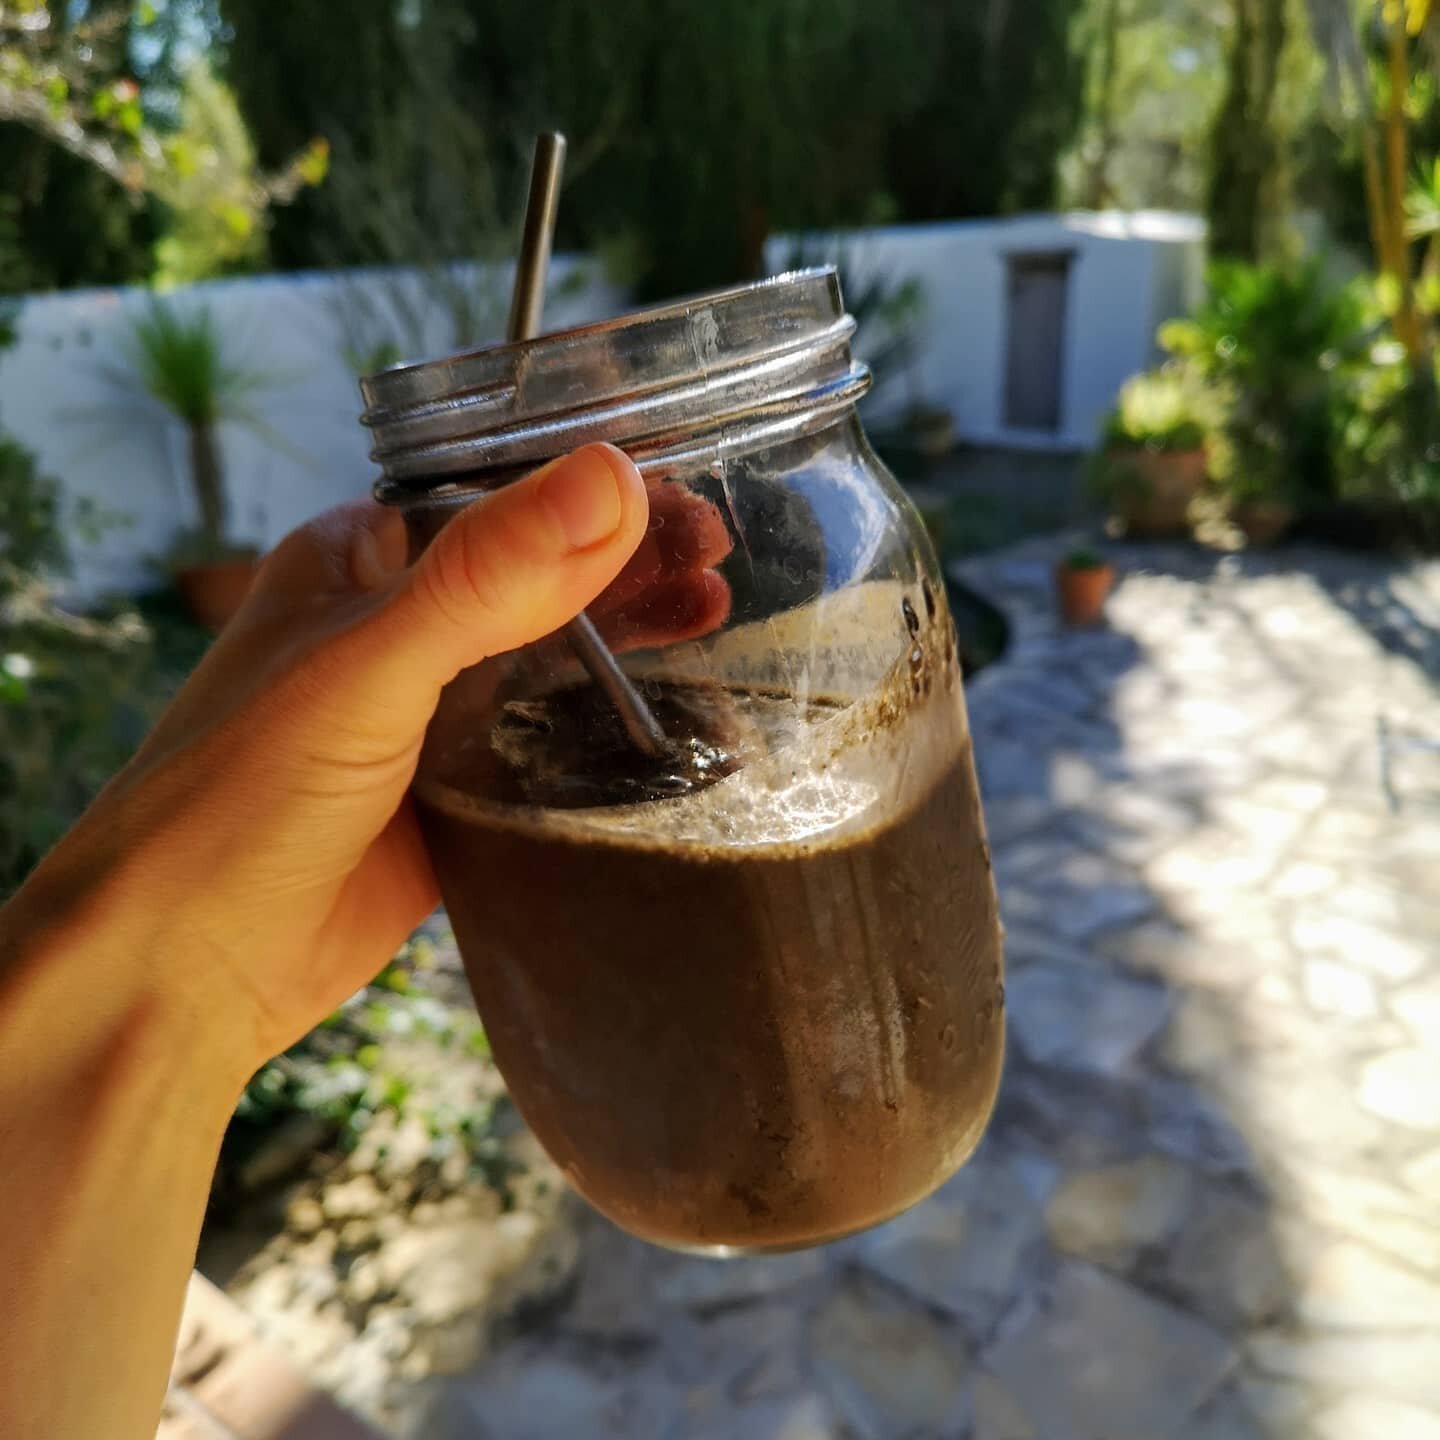 A smoothie to power you through the day in all the right ways 🙌
- Frozen banana
- Frozen blueberries
- Scoop of supergreens (or spirullina, chlorella, wheatgrass, barley grass etc)
- Fresh organic greens (in this smoothie I used beet greens) 
- Spoo